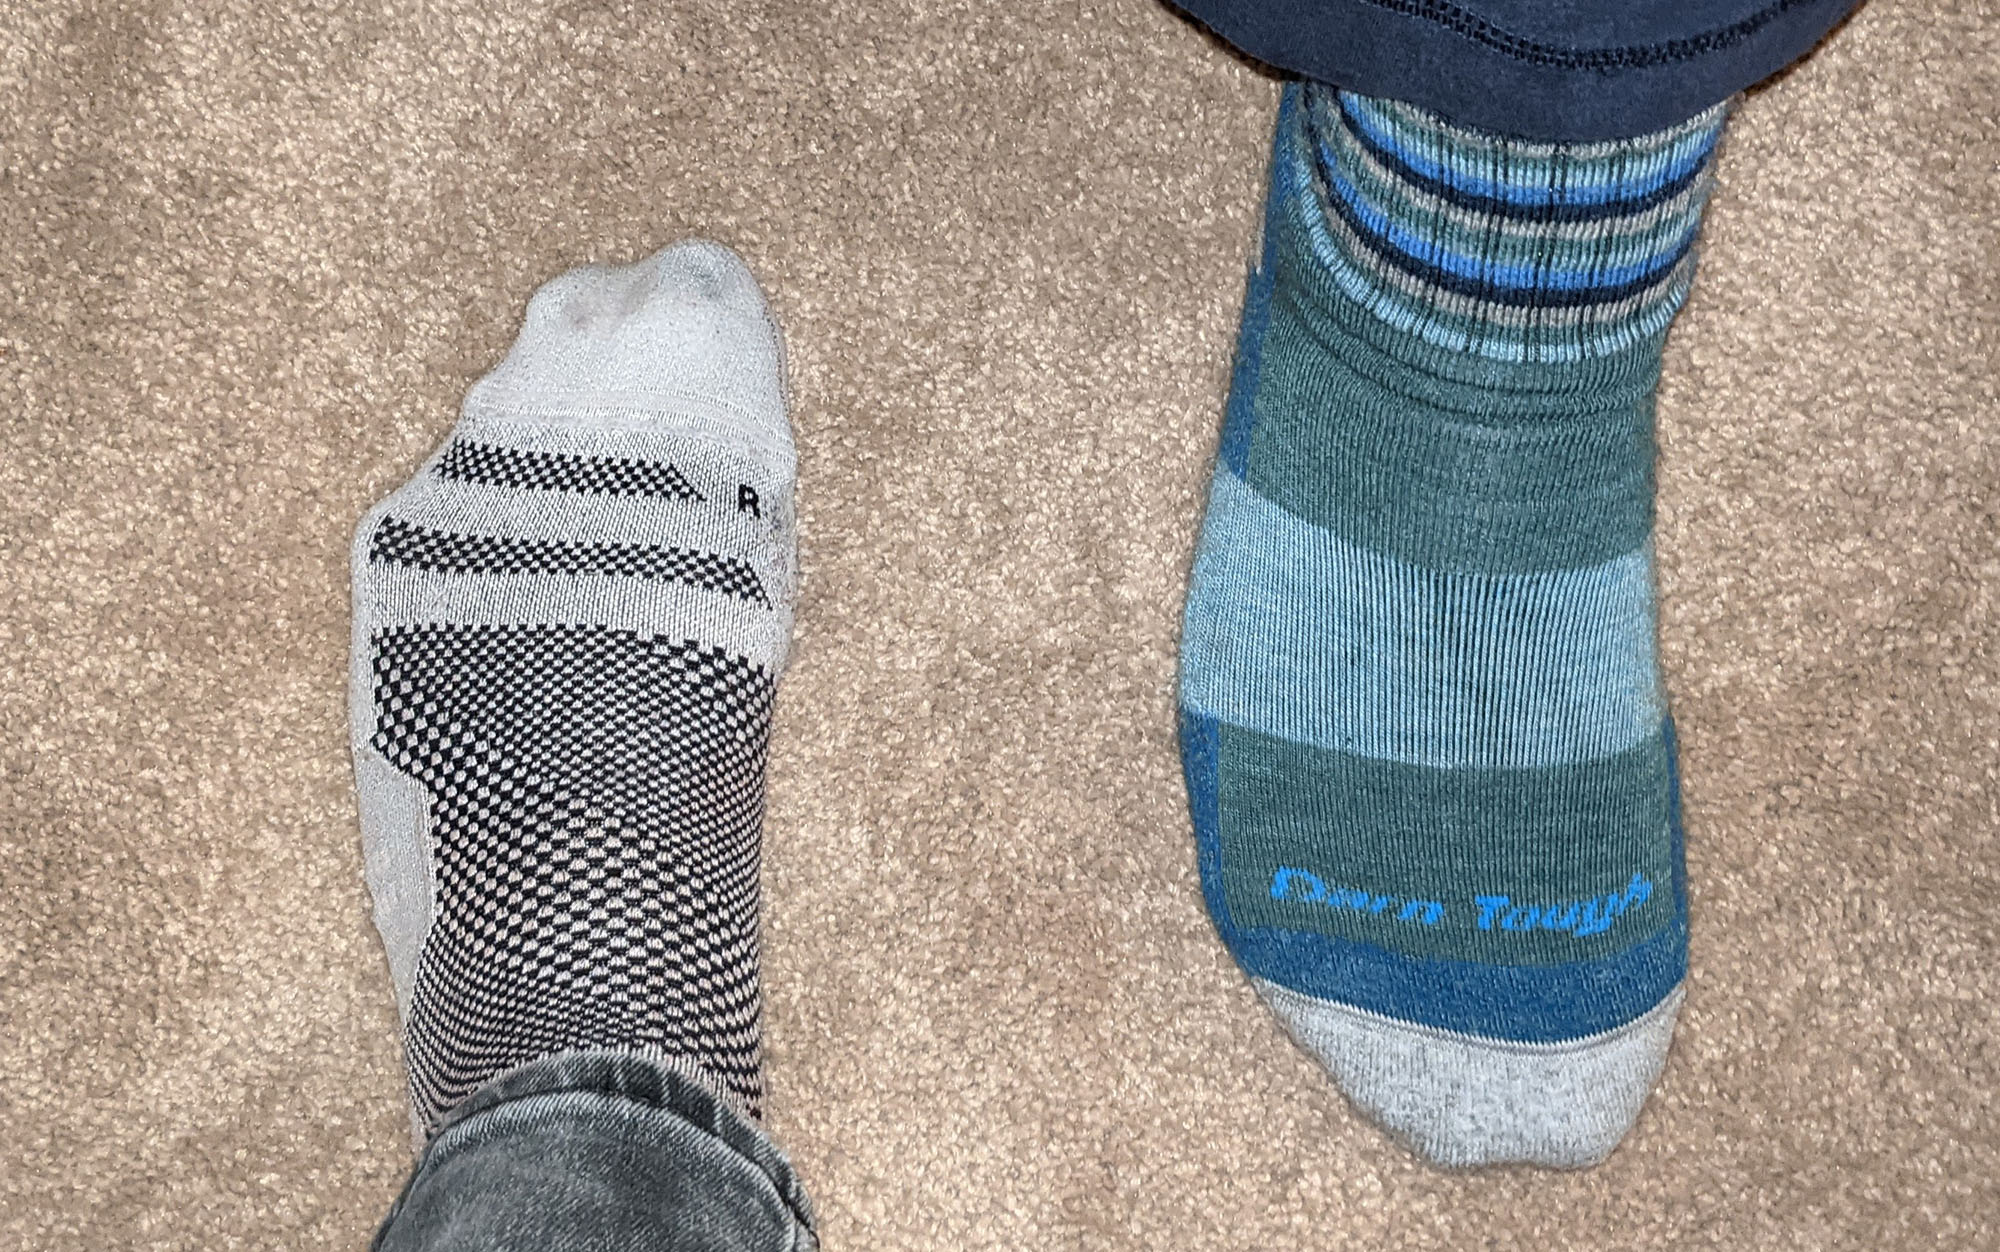 My typical-width foot (left) next to my sister’s wide-width foot (right). We may both wear size 9s, but our experience with footwear is vastly different due to our different widths. 